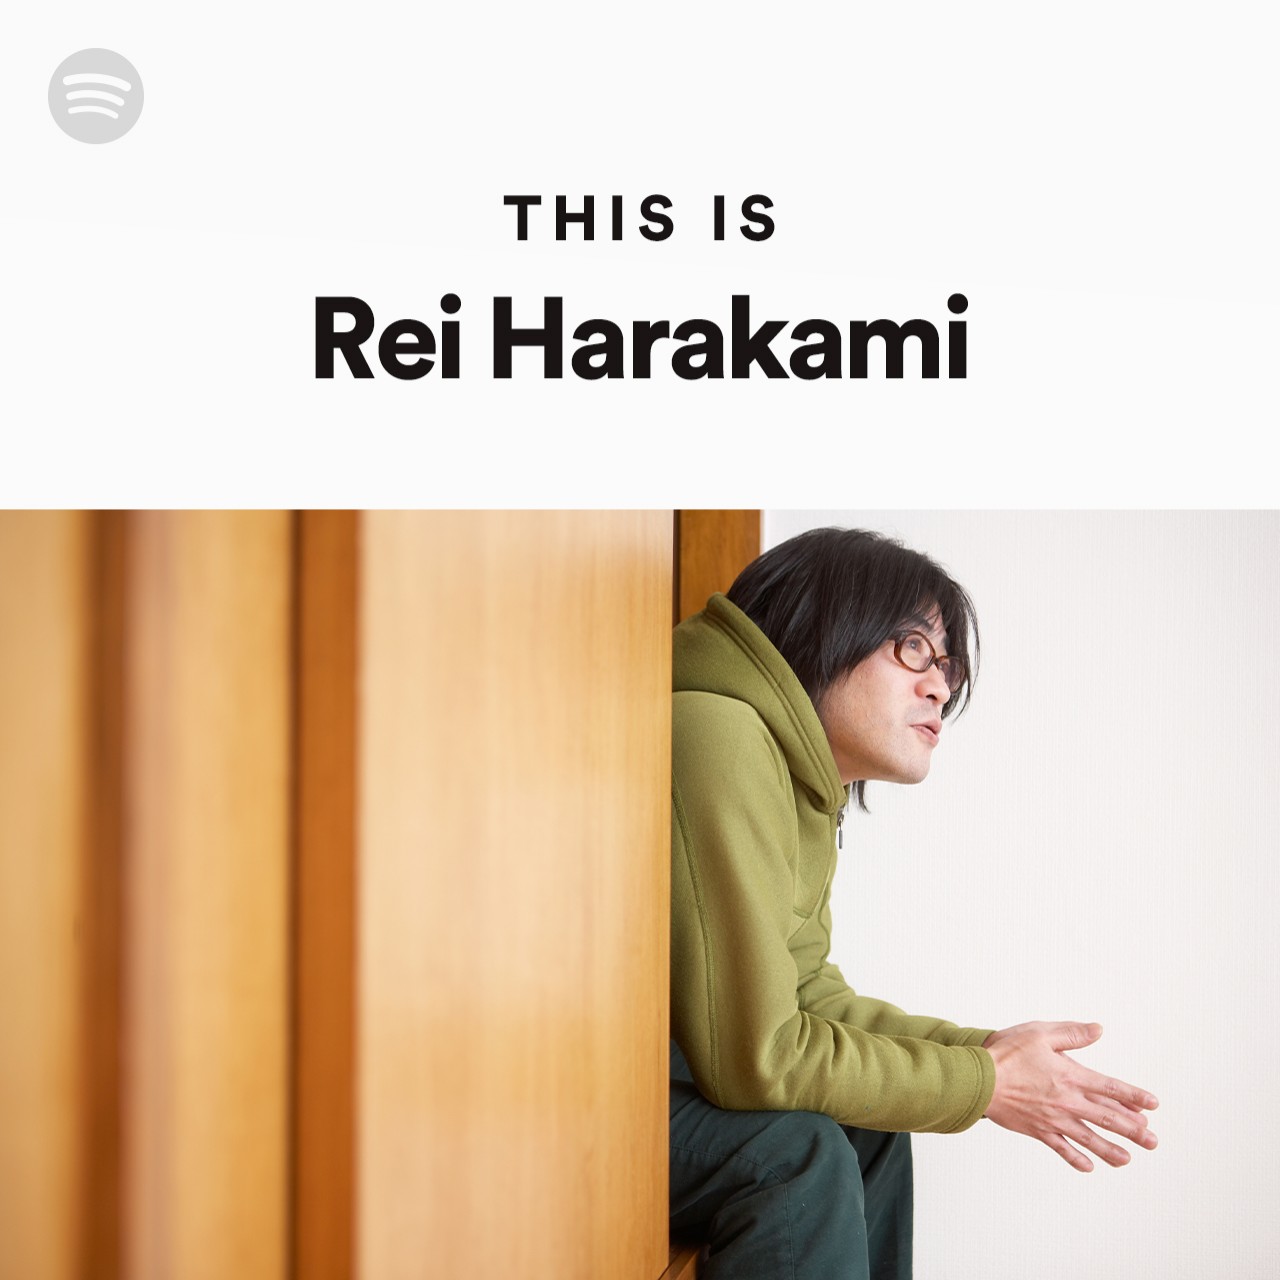 This Is Rei Harakamiのサムネイル